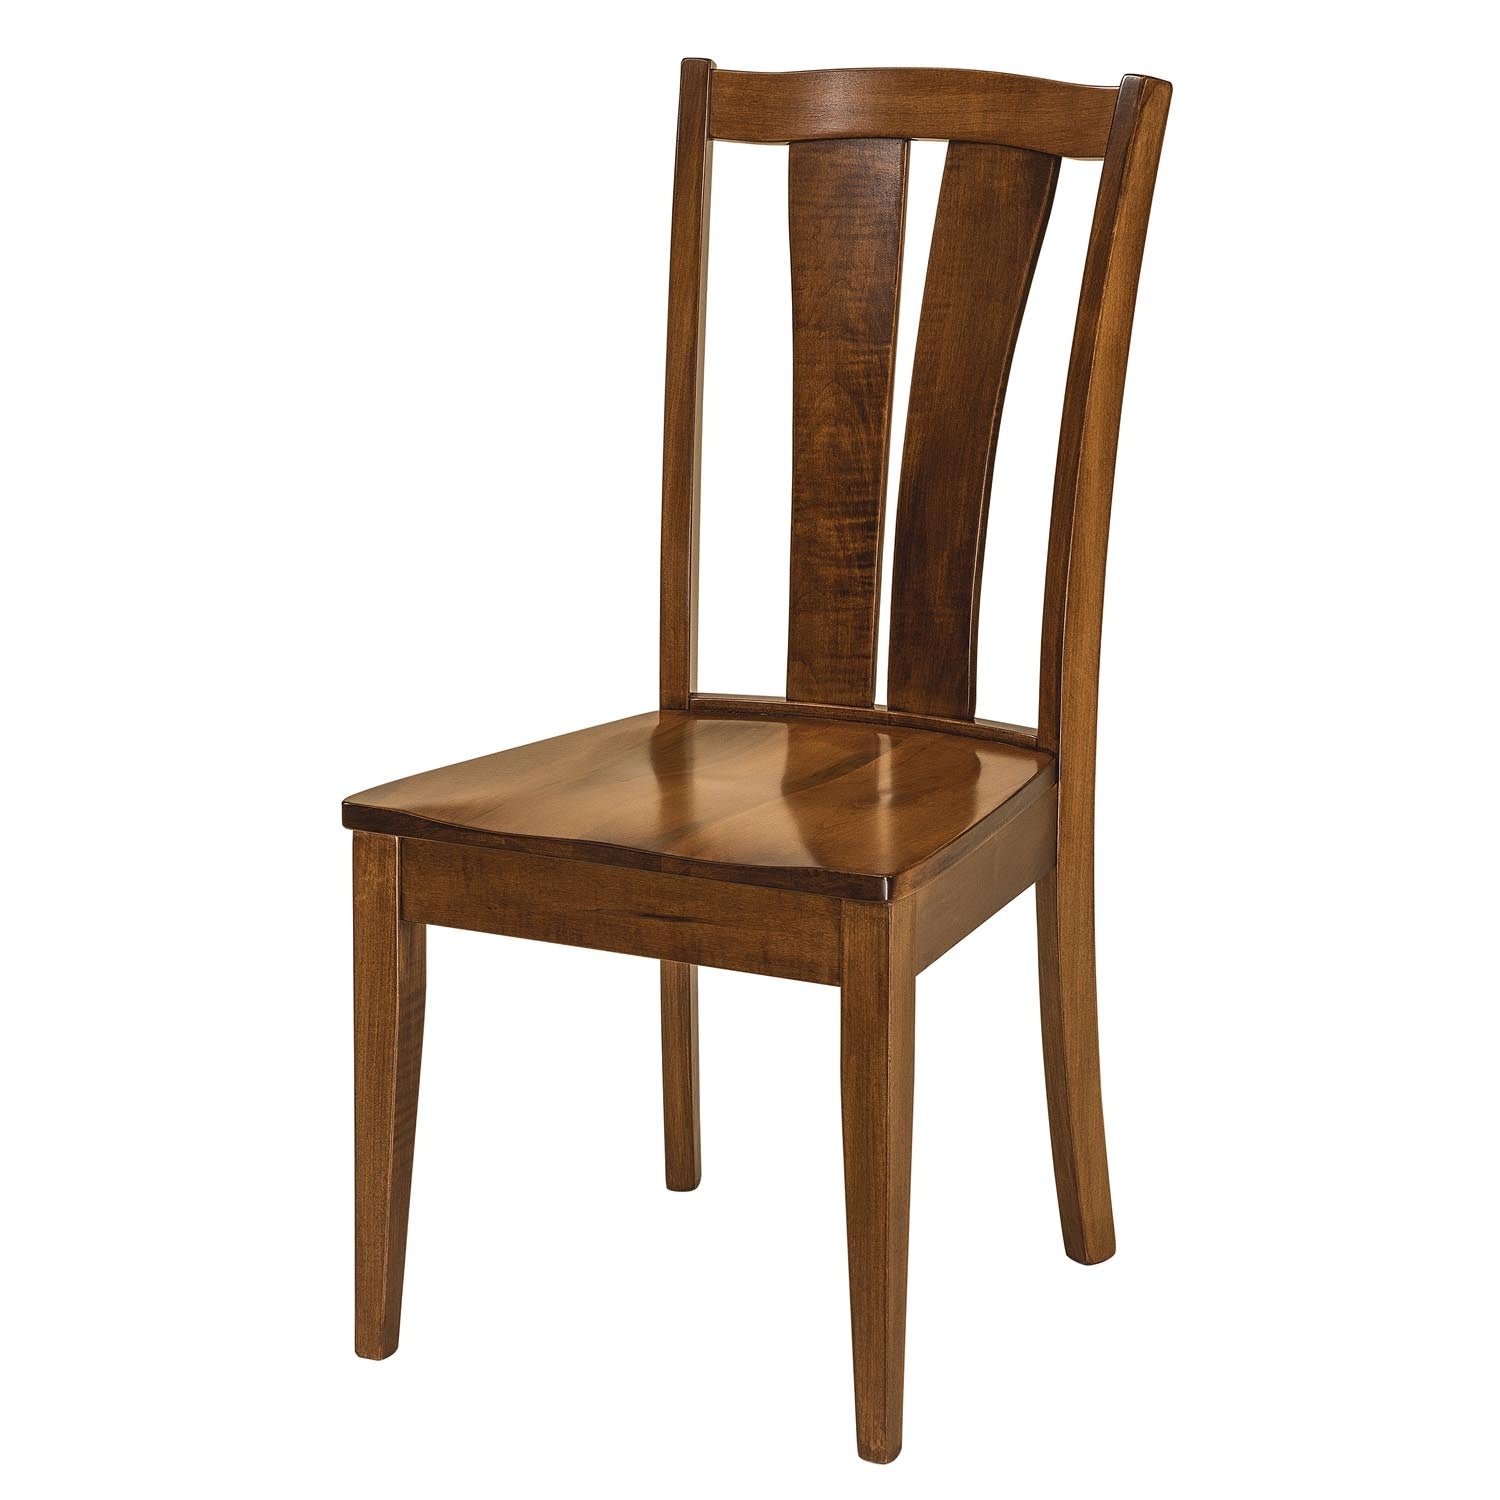 Brawley Chair - snyders.furniture